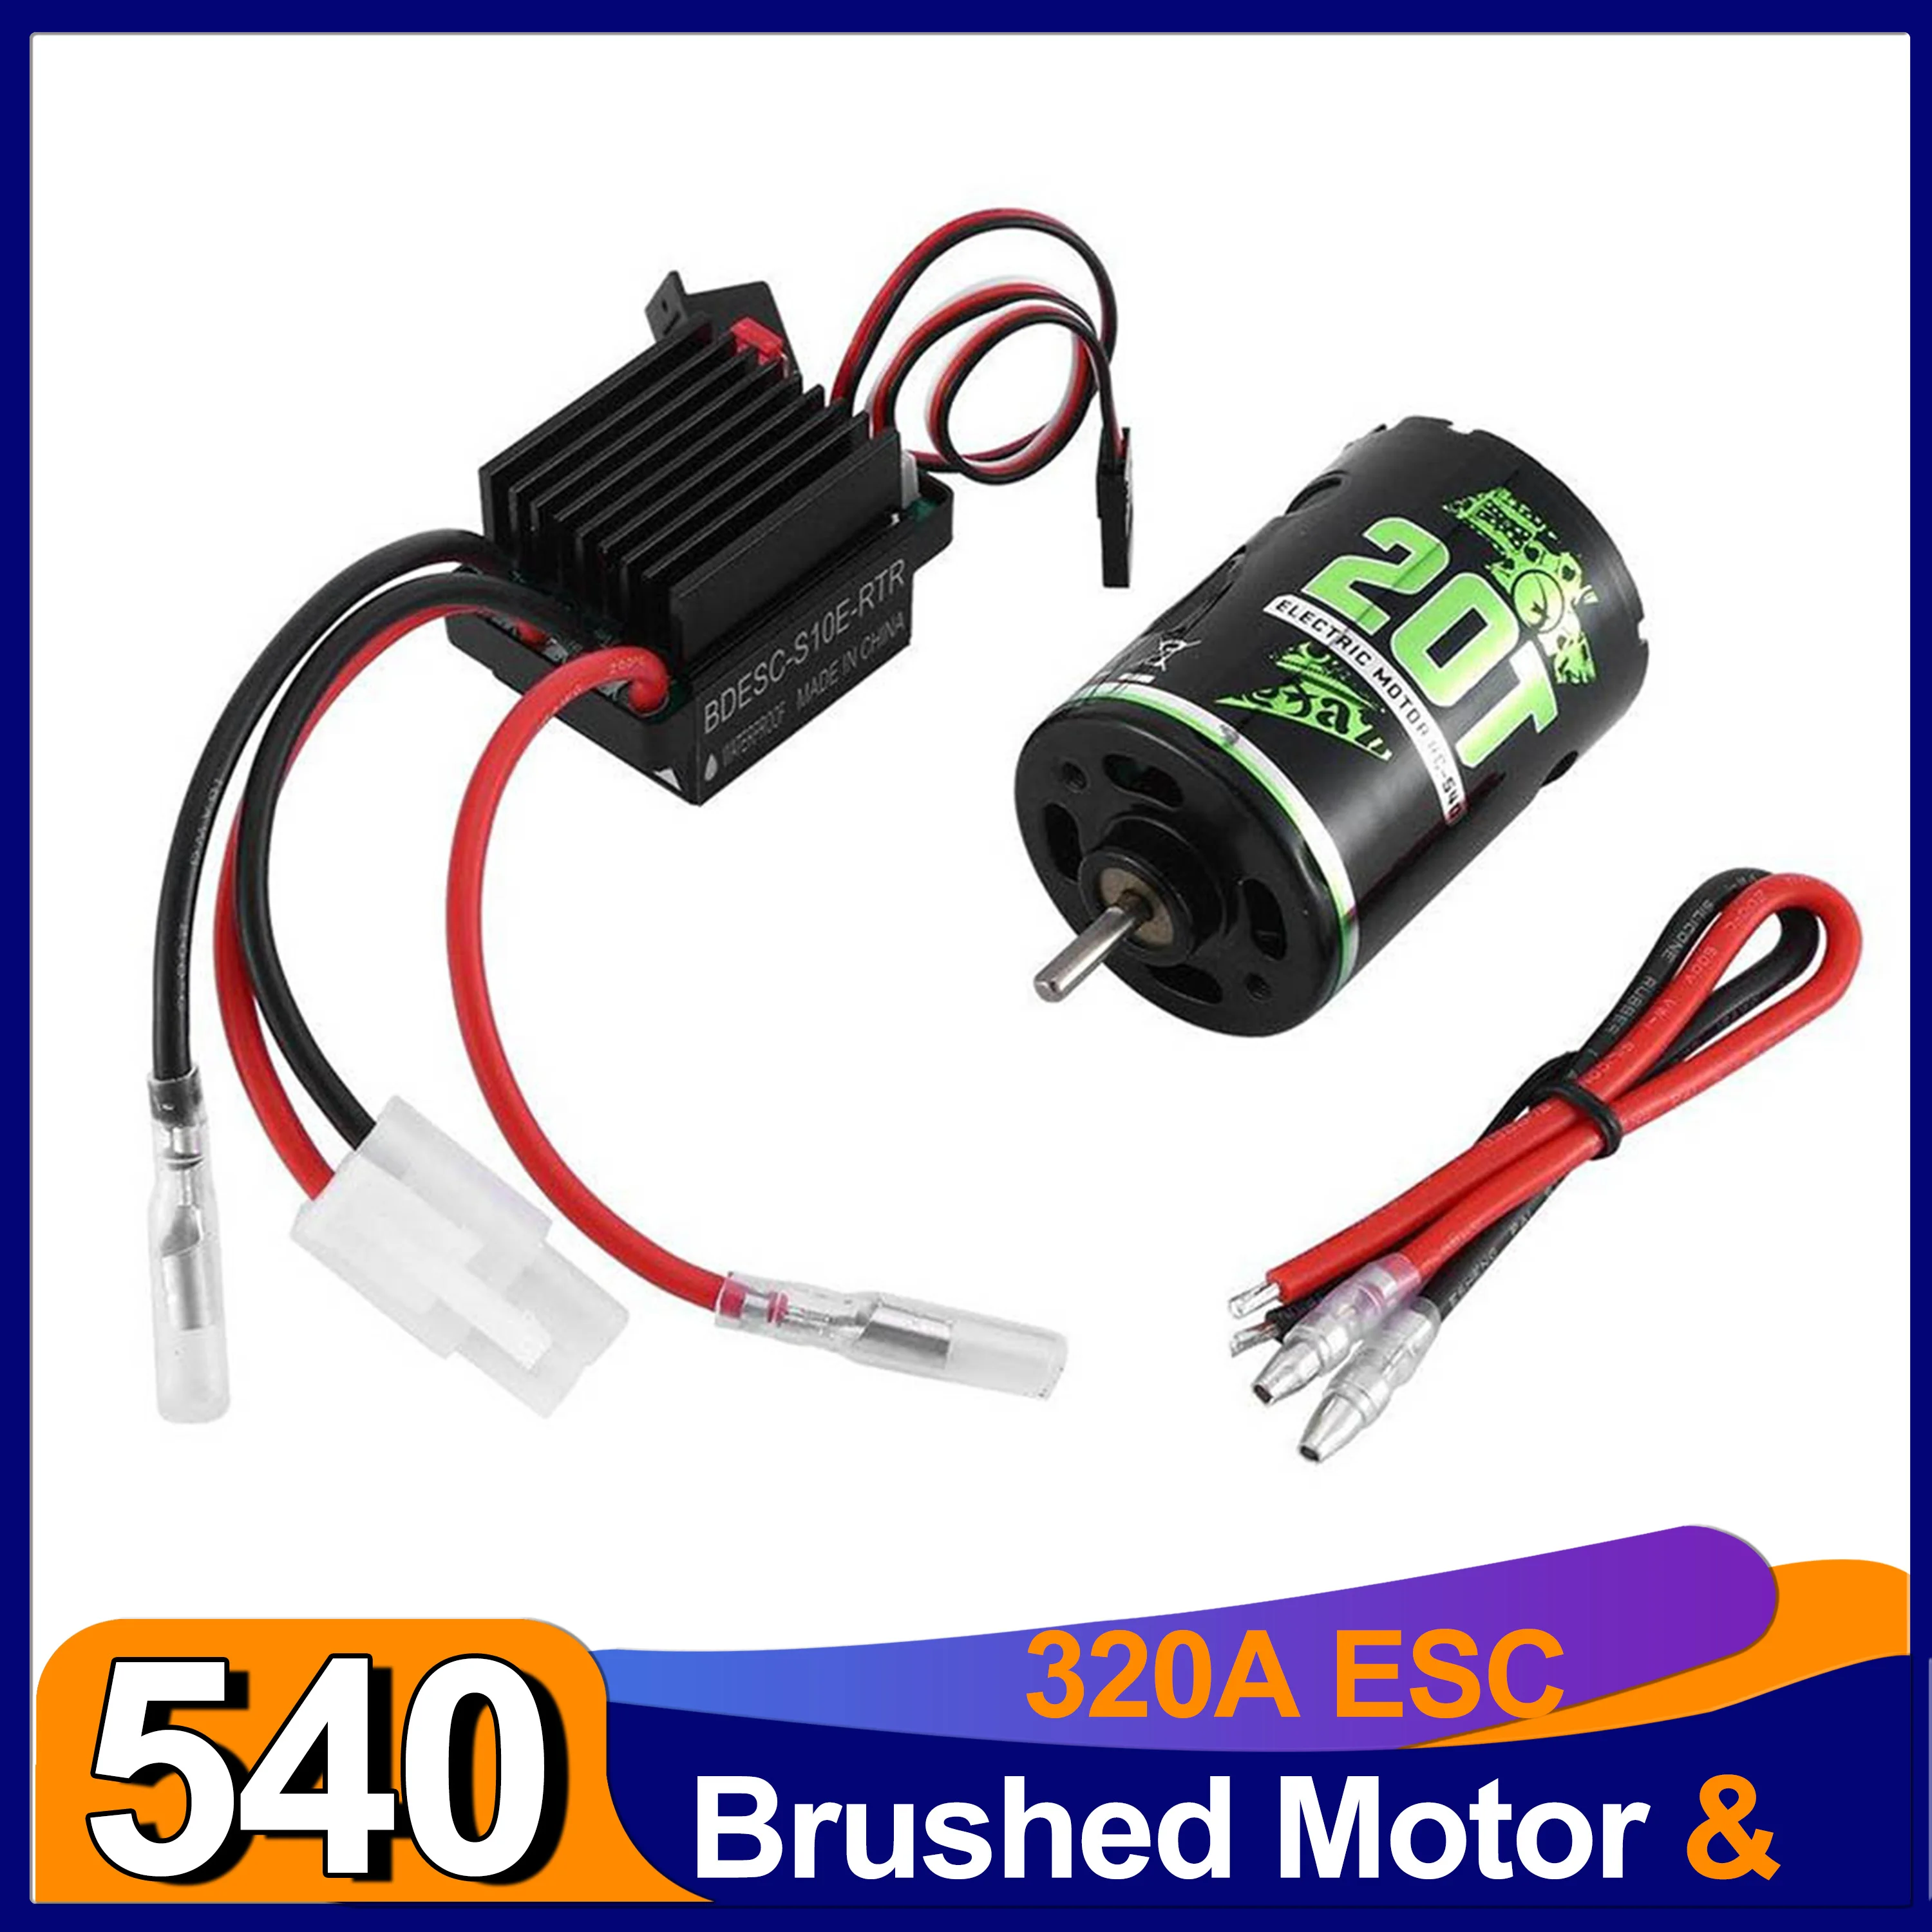 

540 Brushed Motor RC Crawler Motor 20T 60A ESC Brushed Electric Speed Controller 5V/2A BEC for 1/10 RC Car TRX AXIAL HSP Wltoys